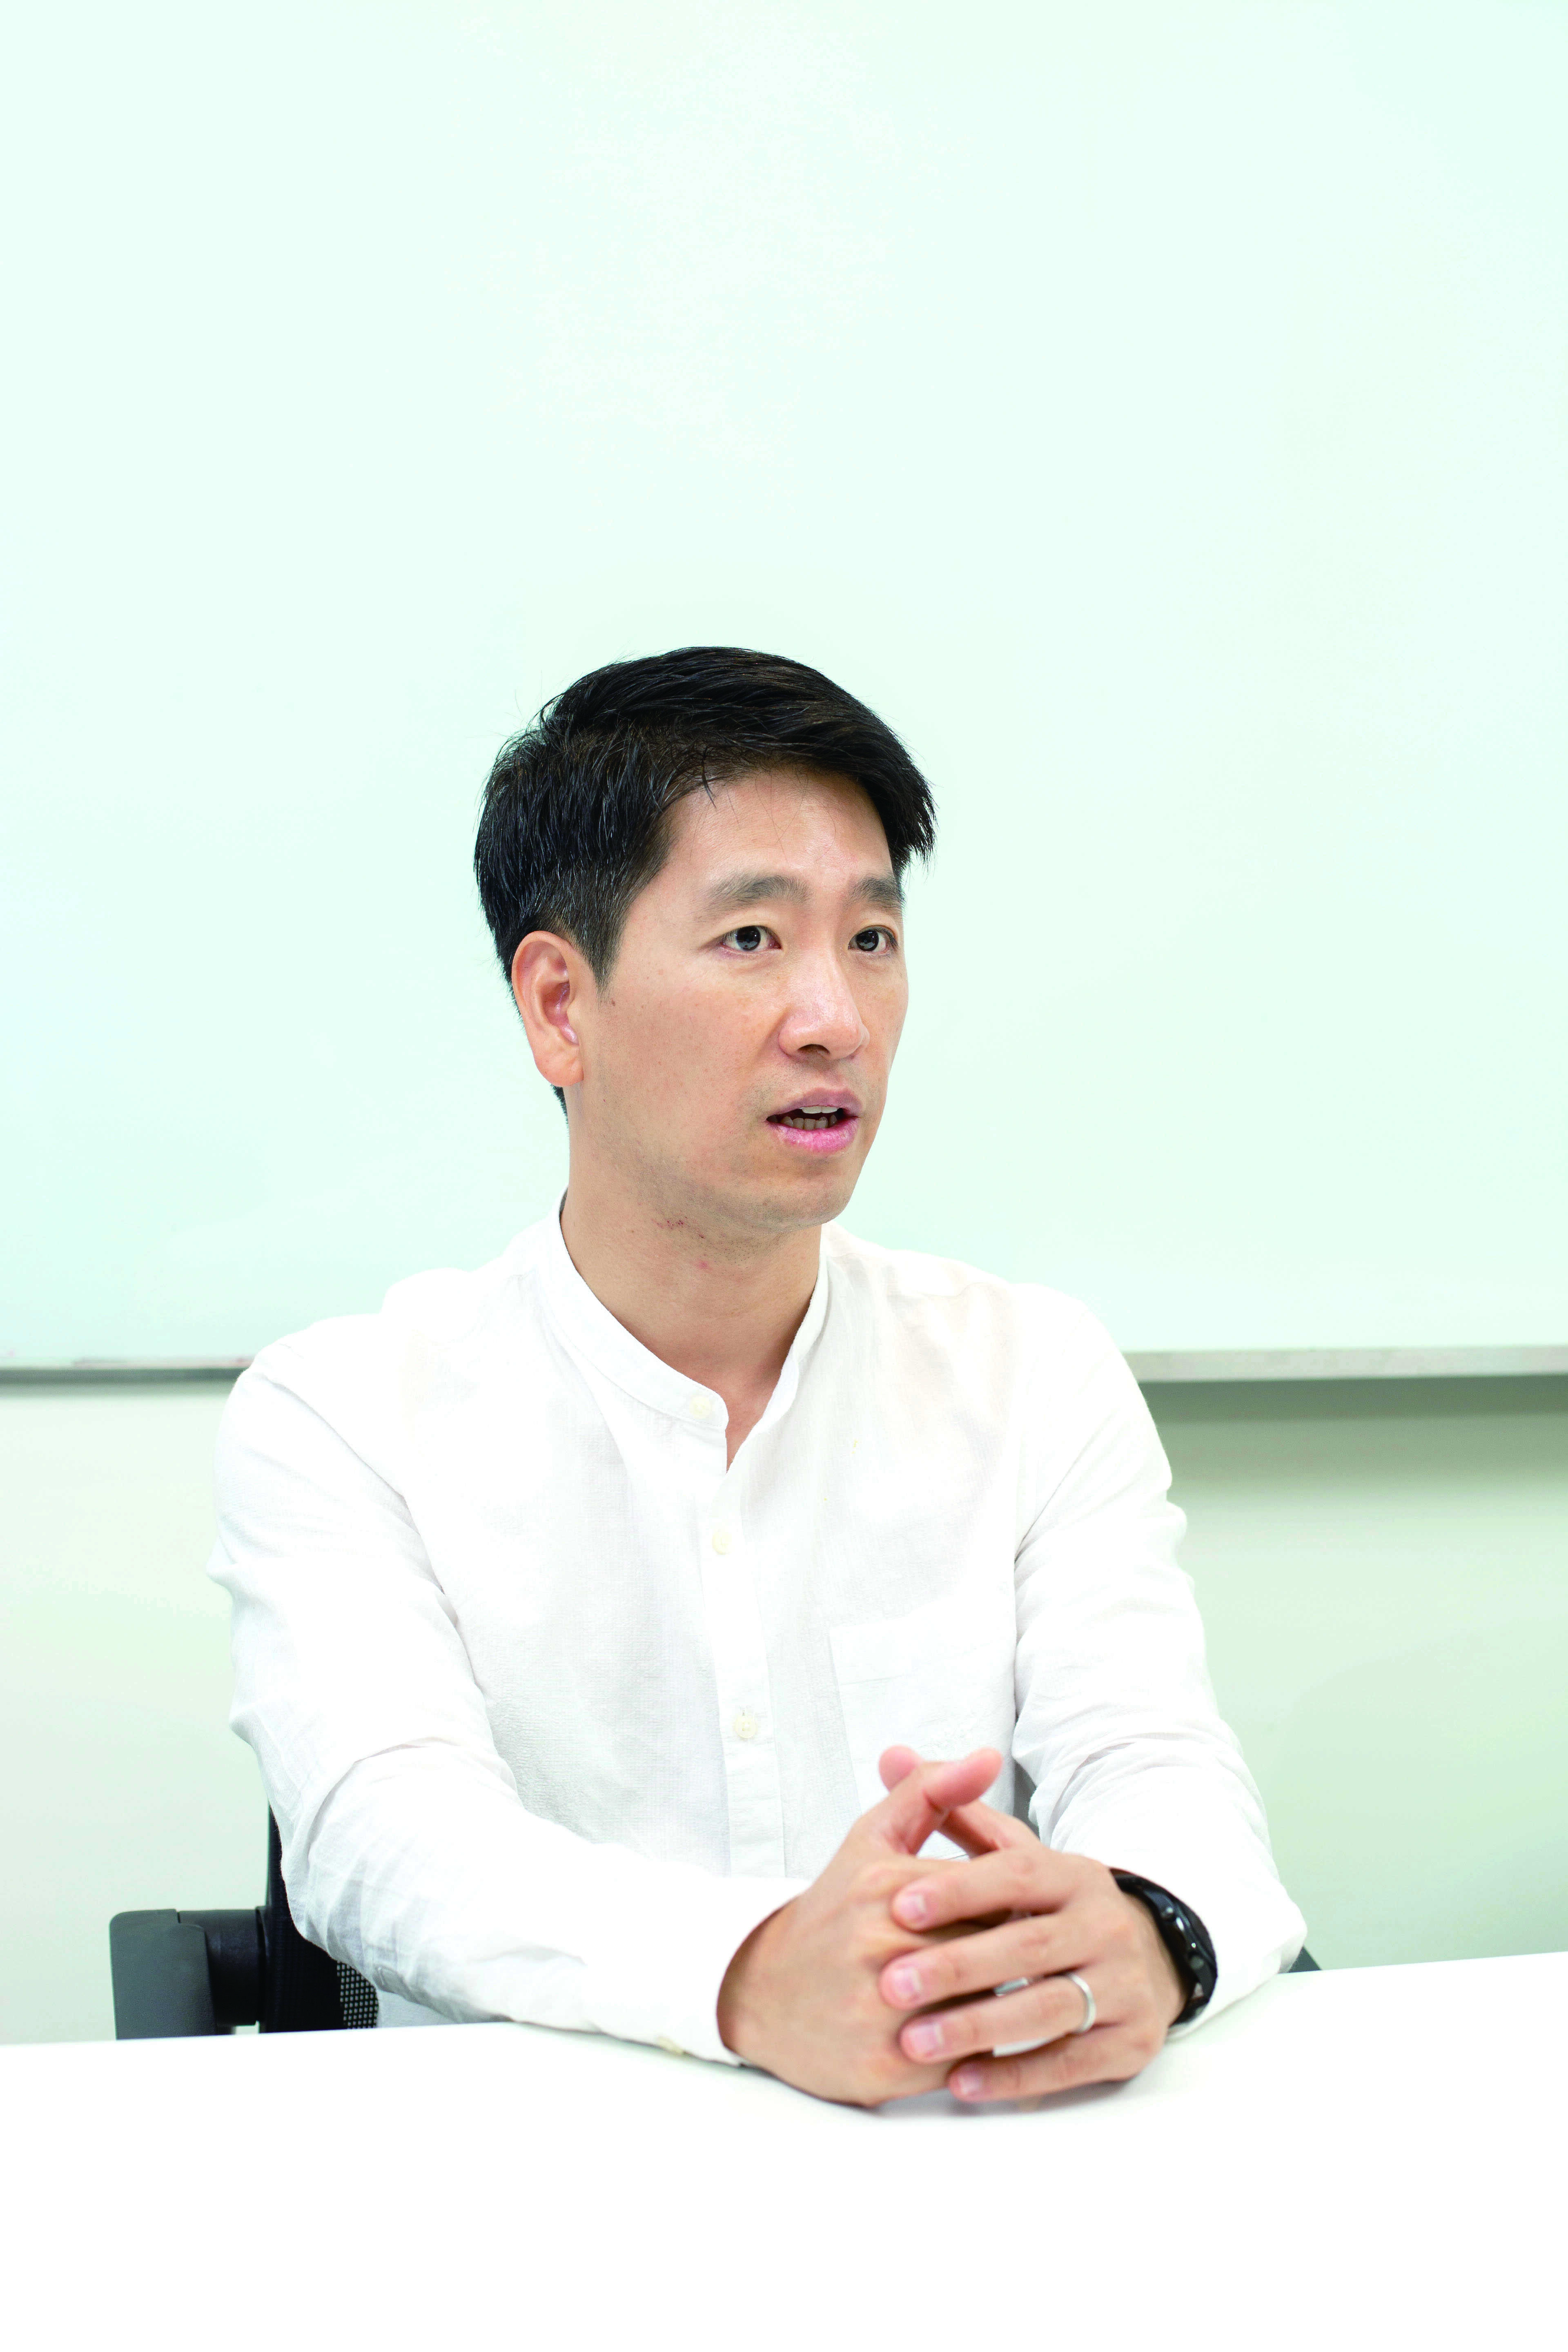 KIM Sung Shin
            Assistant Professor at Hanyang University Department of Psychology and Brain Science
            (Former Young Scientist Fellow (YSF) at IBS Center for Neuroscience Imaging Research)